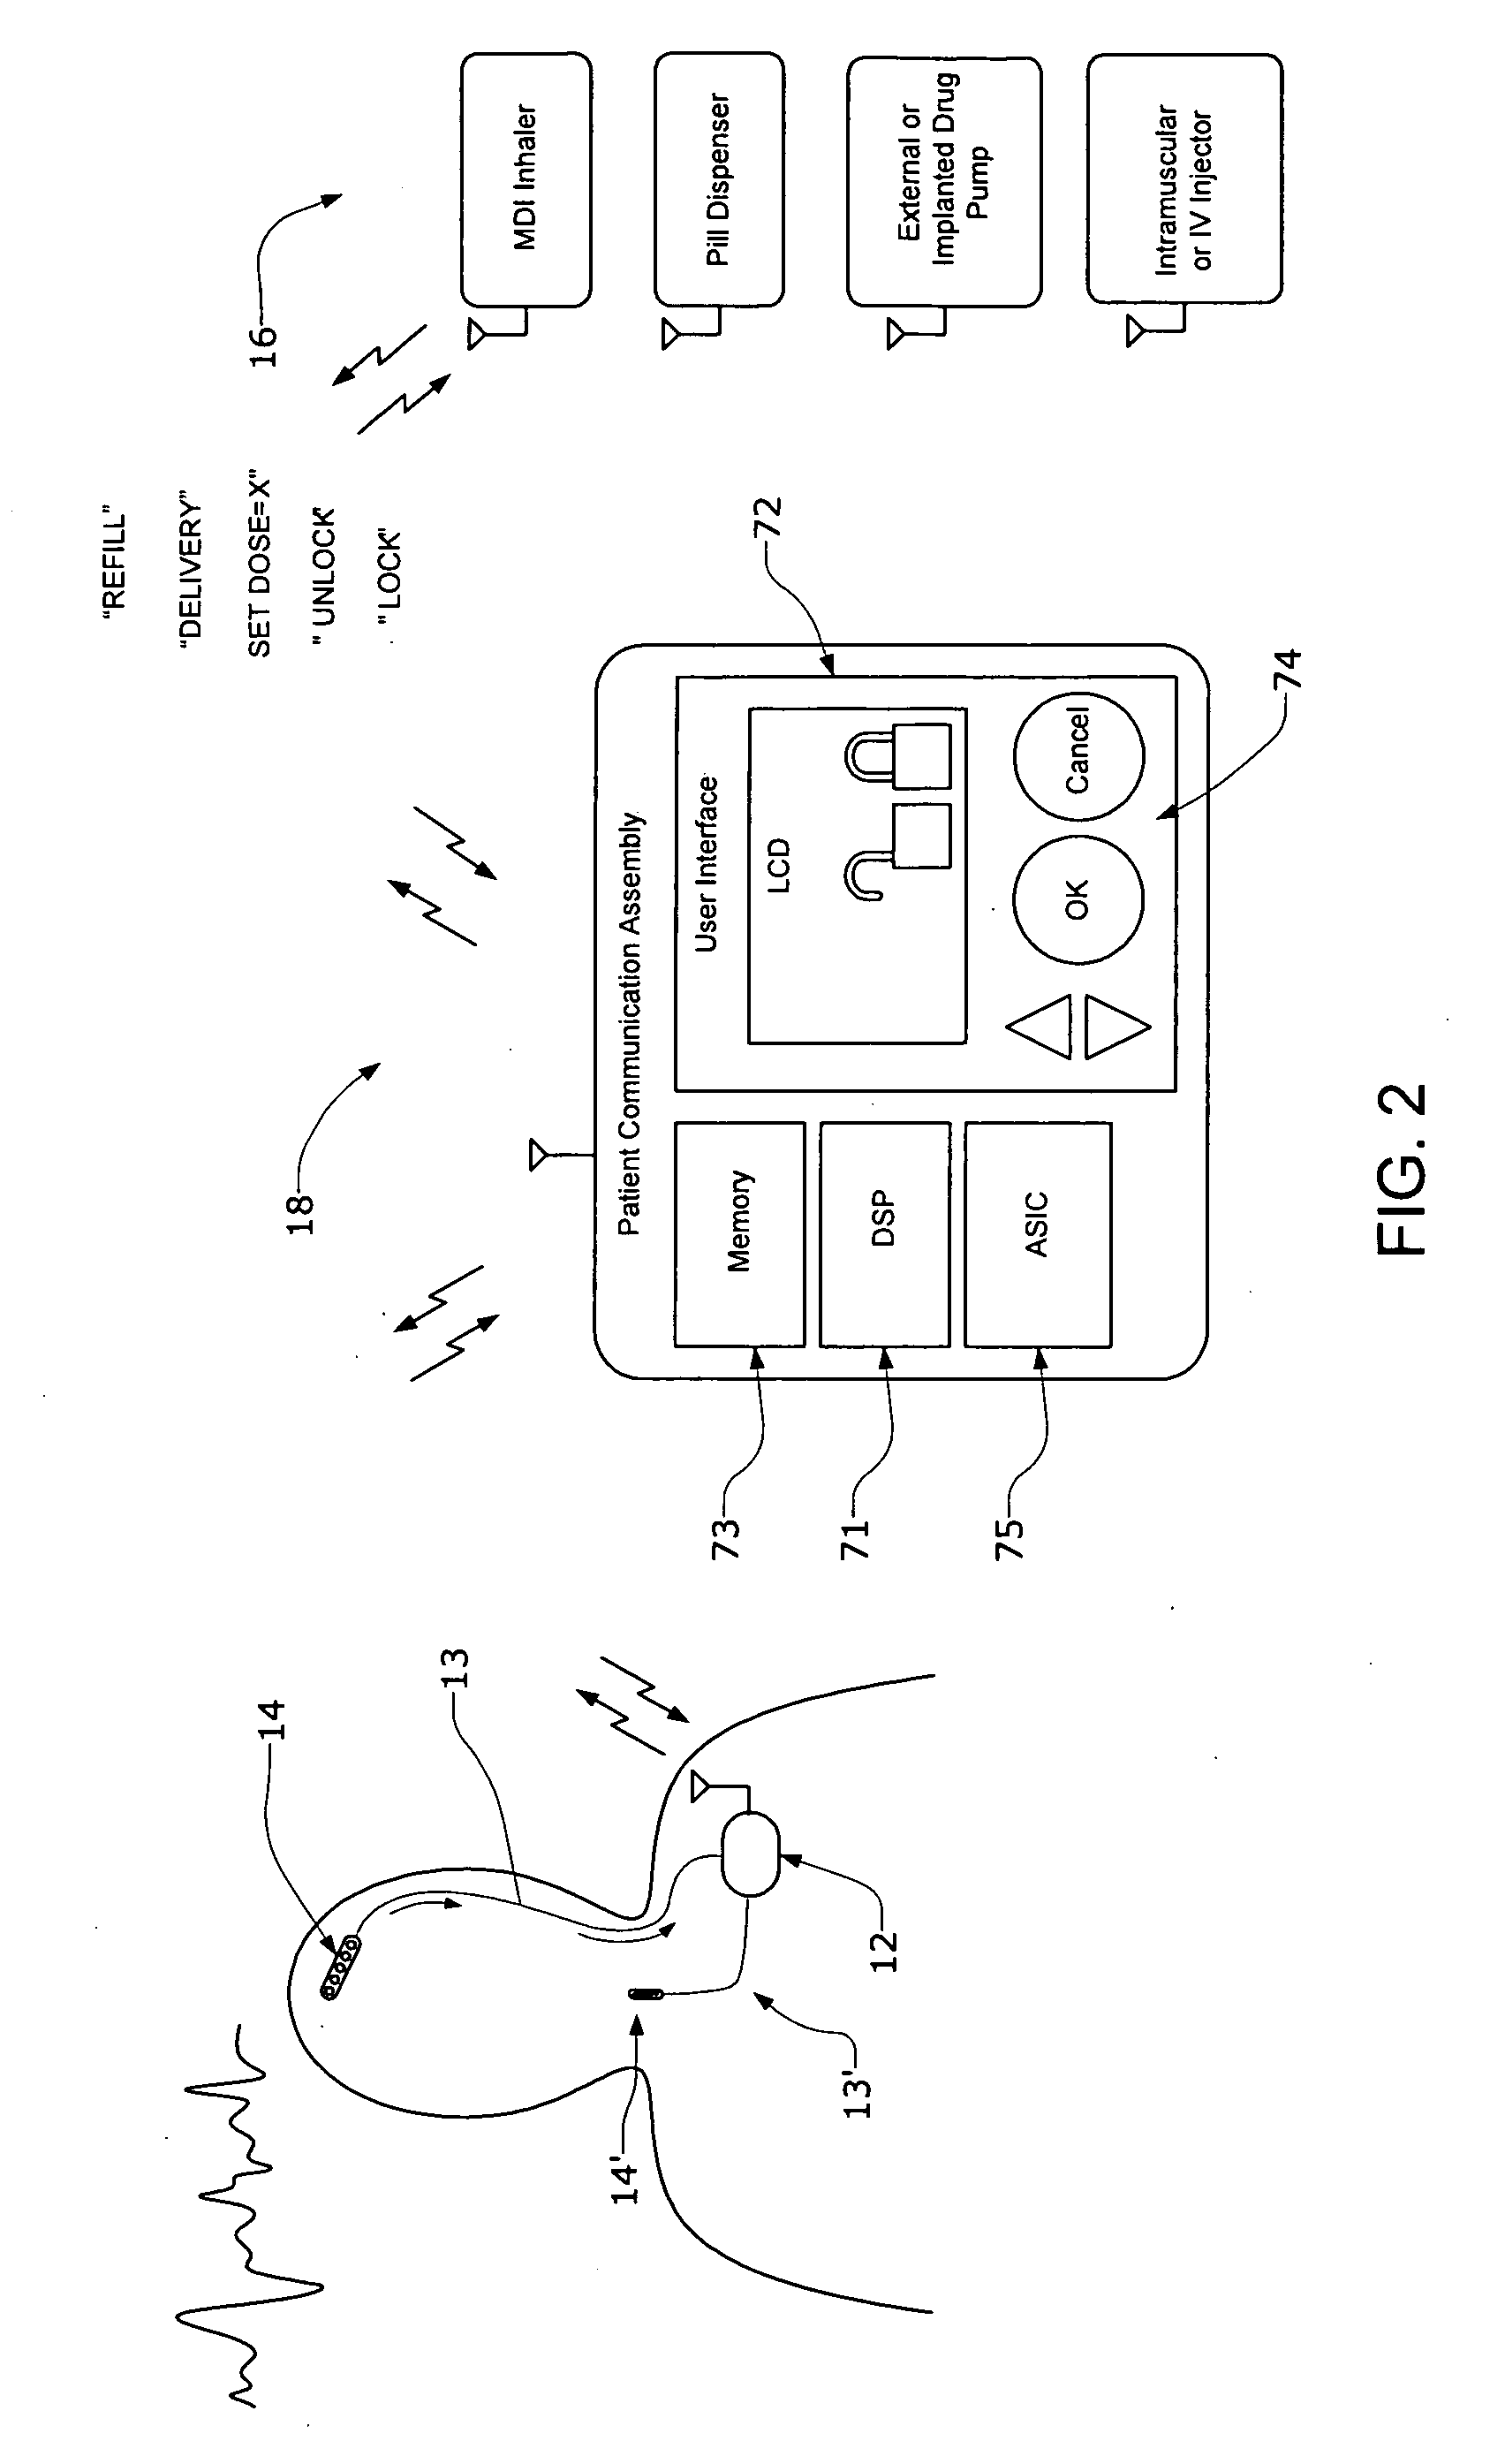 Systems and methods for characterizing a patient's propensity for a neurological event and for communicating with a pharmacological agent dispenser